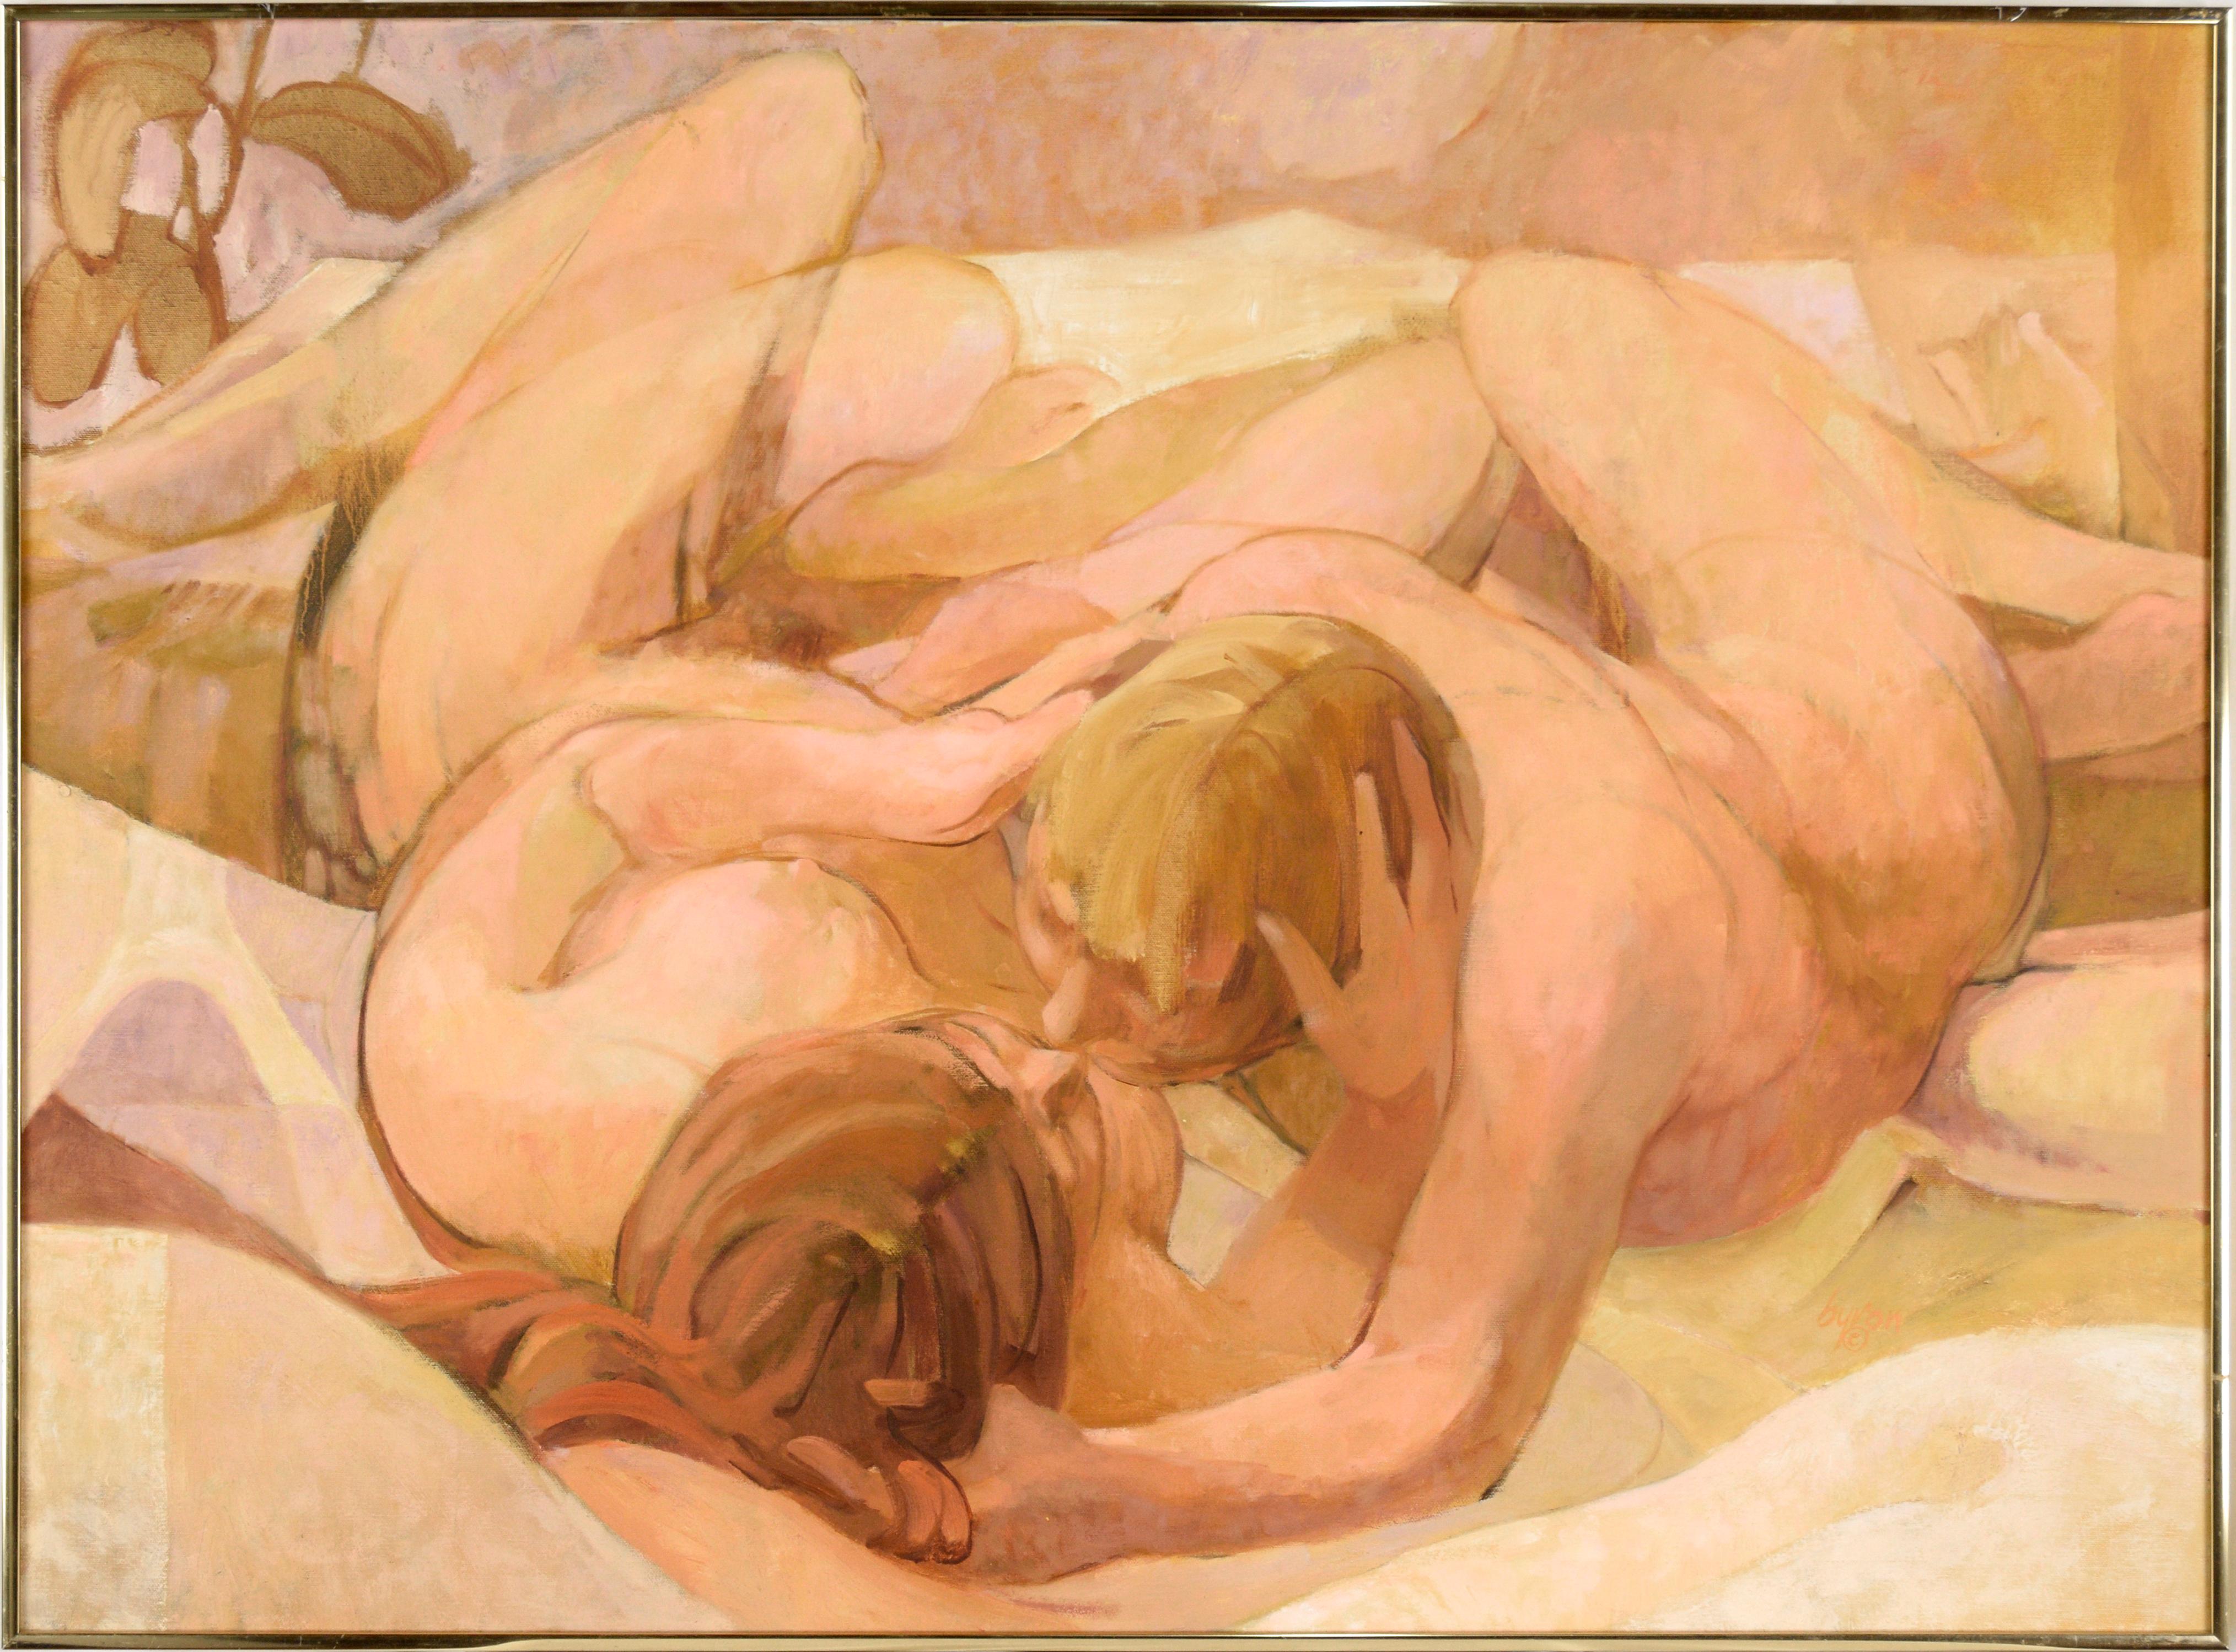 Byron Richard Rodarmel Figurative Painting - "Morning" Nude Couple in Bed - Figurative Composition in Oil on Canvas